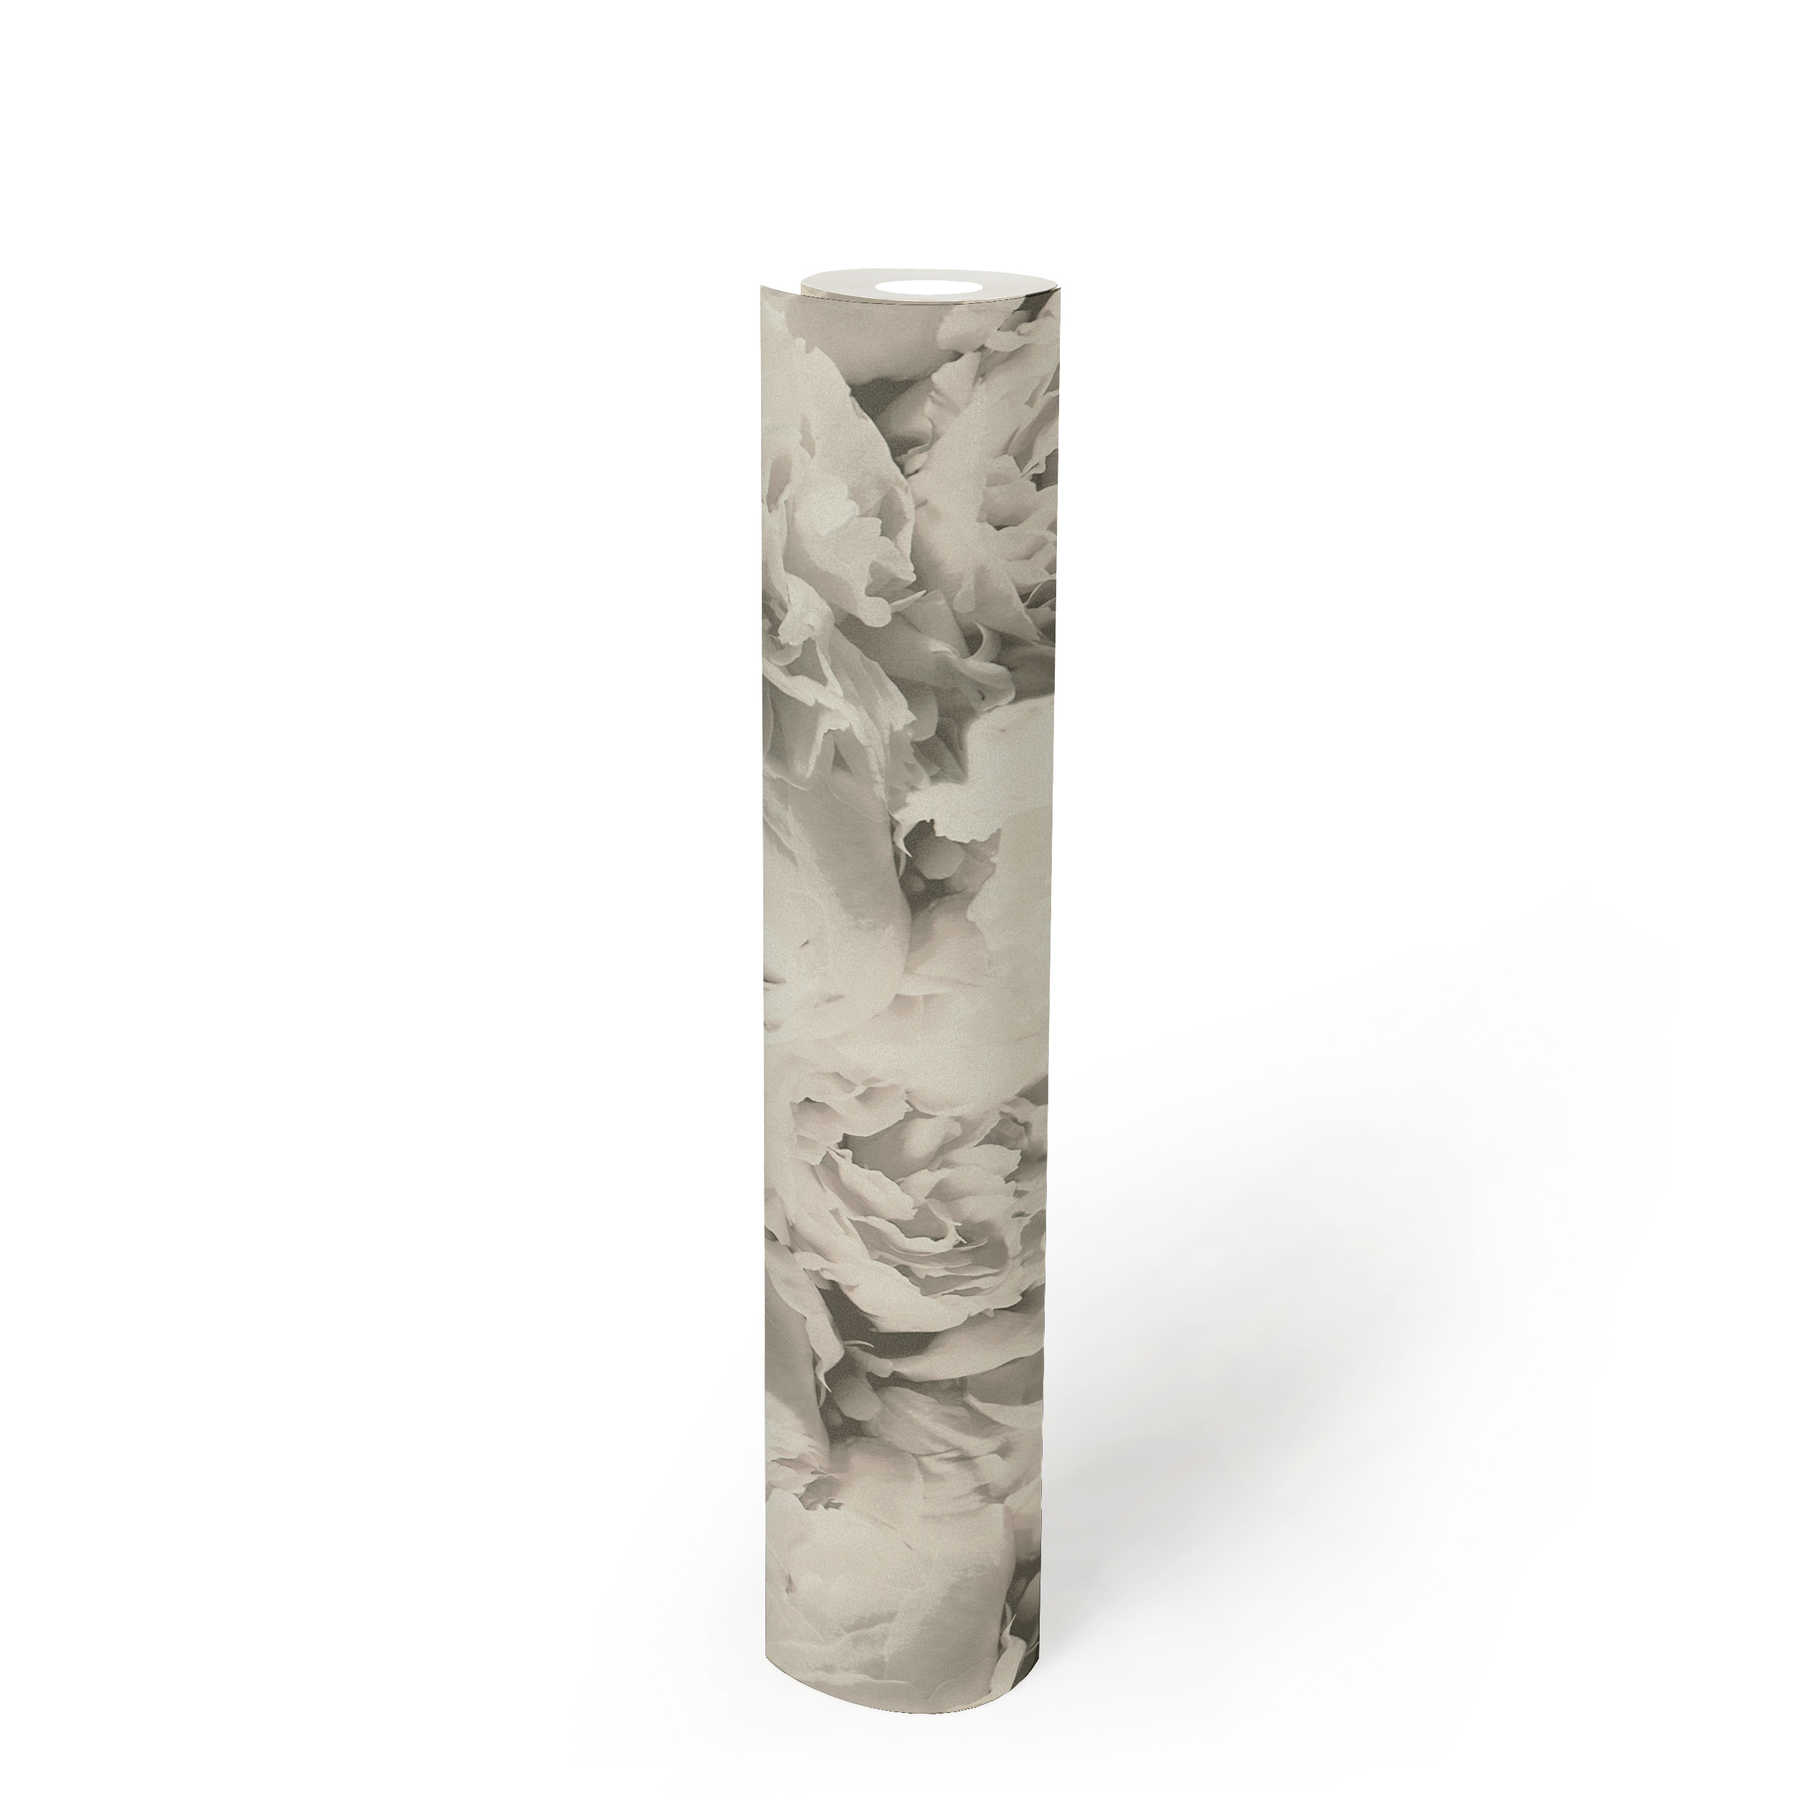             Floral wallpaper roses with shimmer effect - beige, cream, grey
        